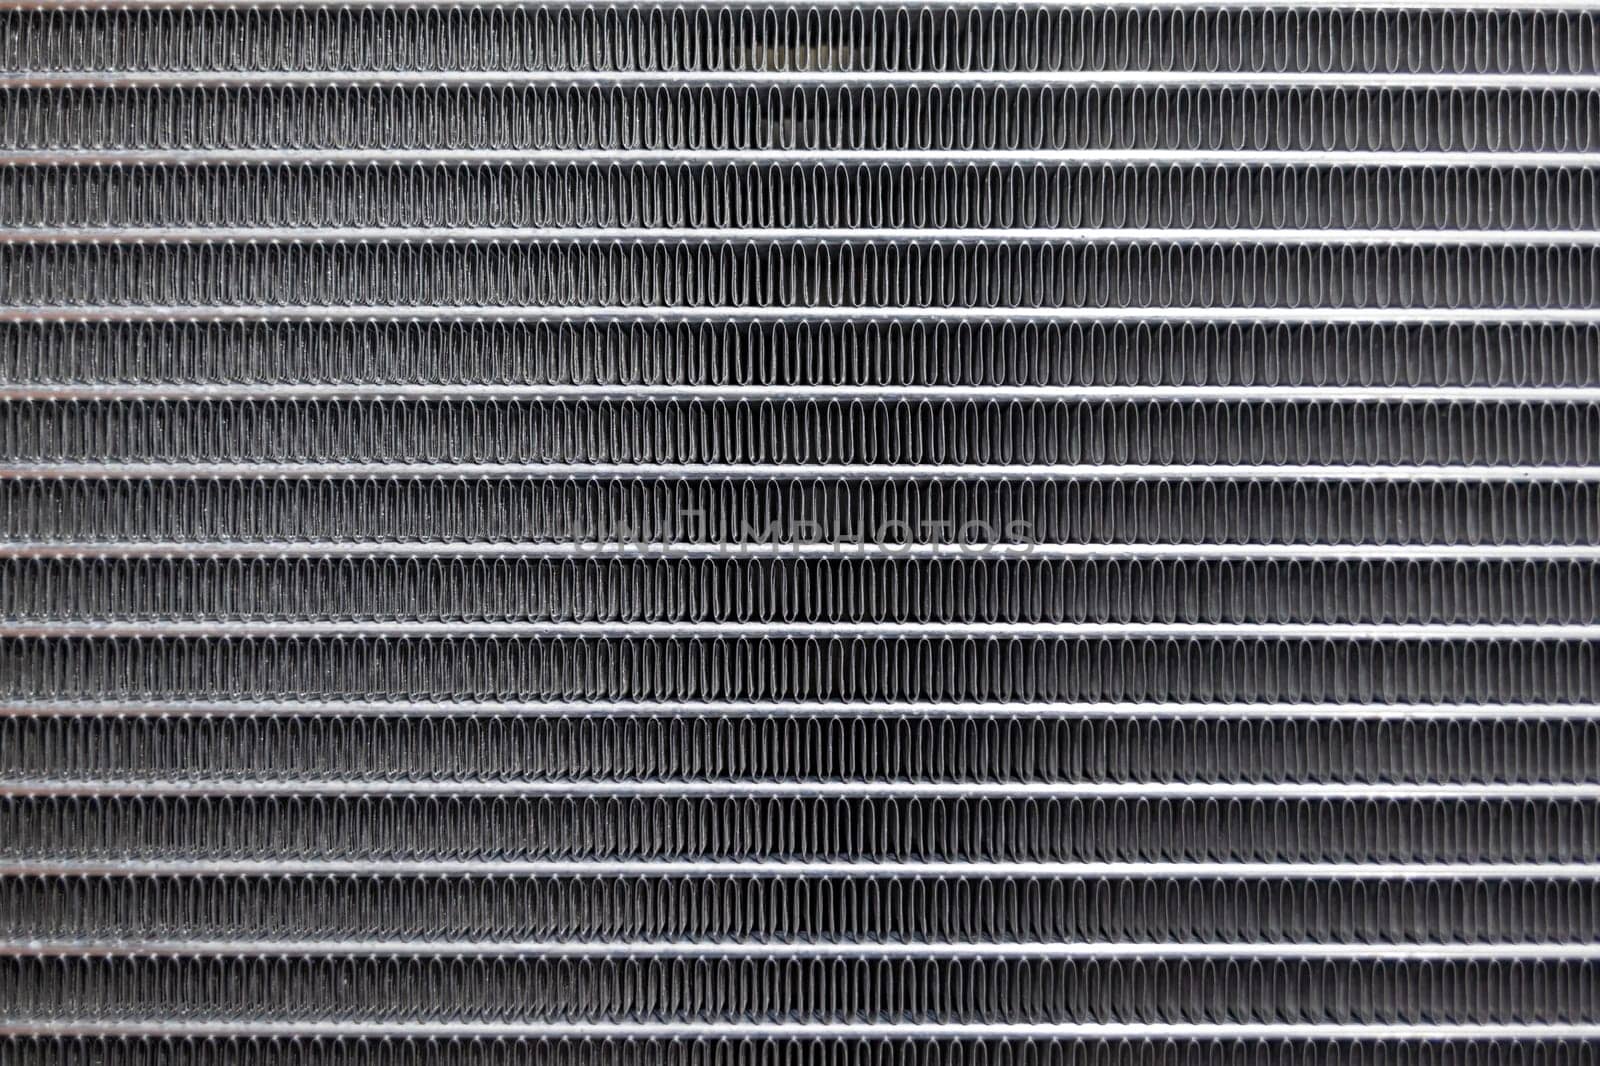 Texture of a car radiator. Engine cooler background. Vintage style. Radiator grille for car interior heater air conditioner, close-up. Radiator repair and replacement.